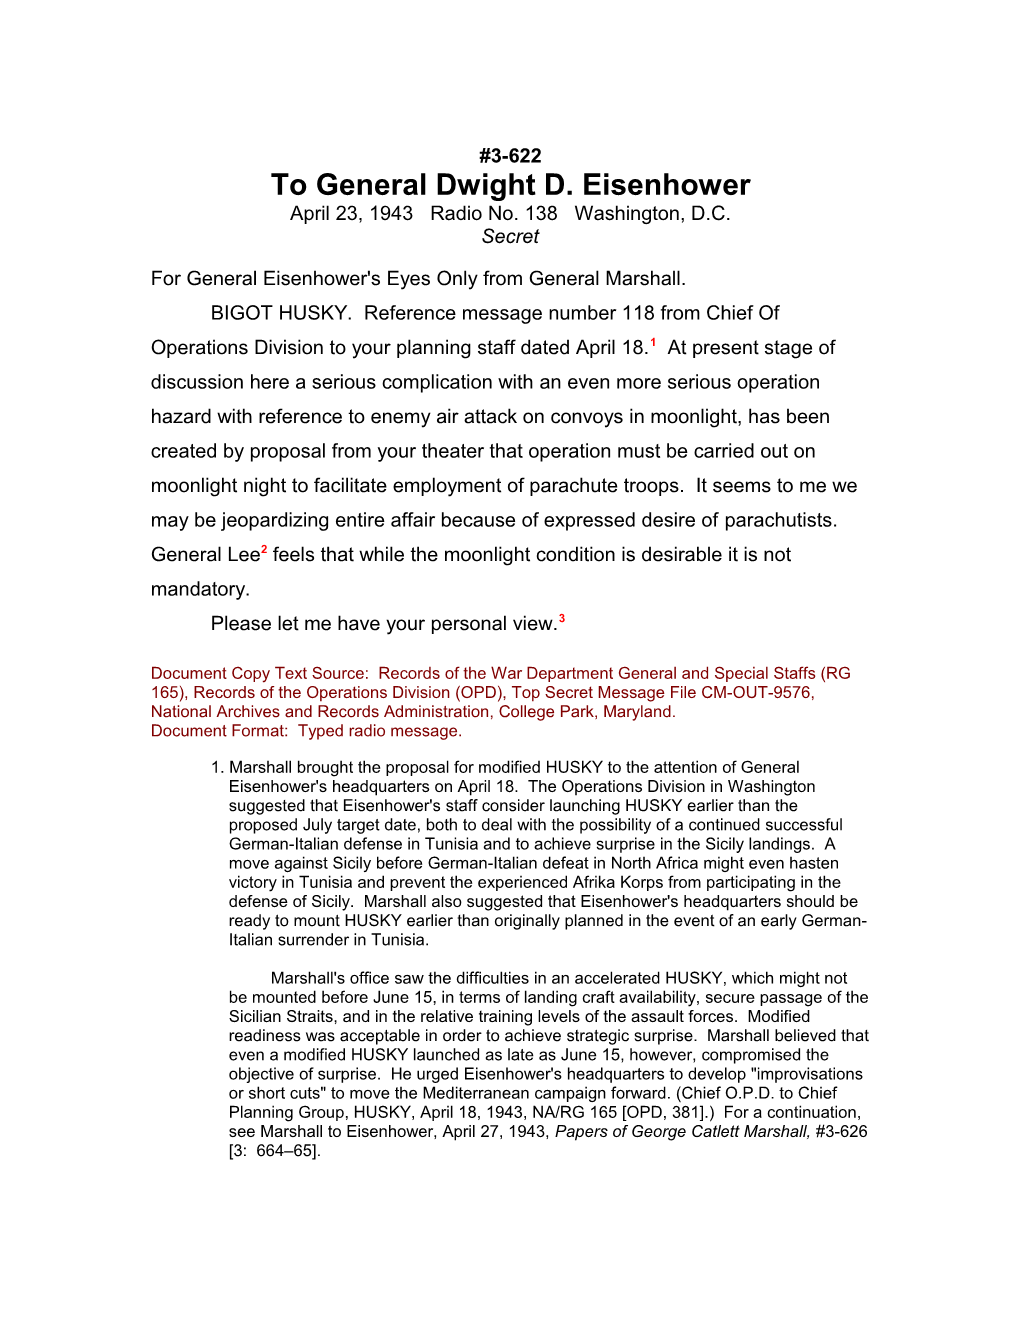 To General Dwight D. Eisenhower s1